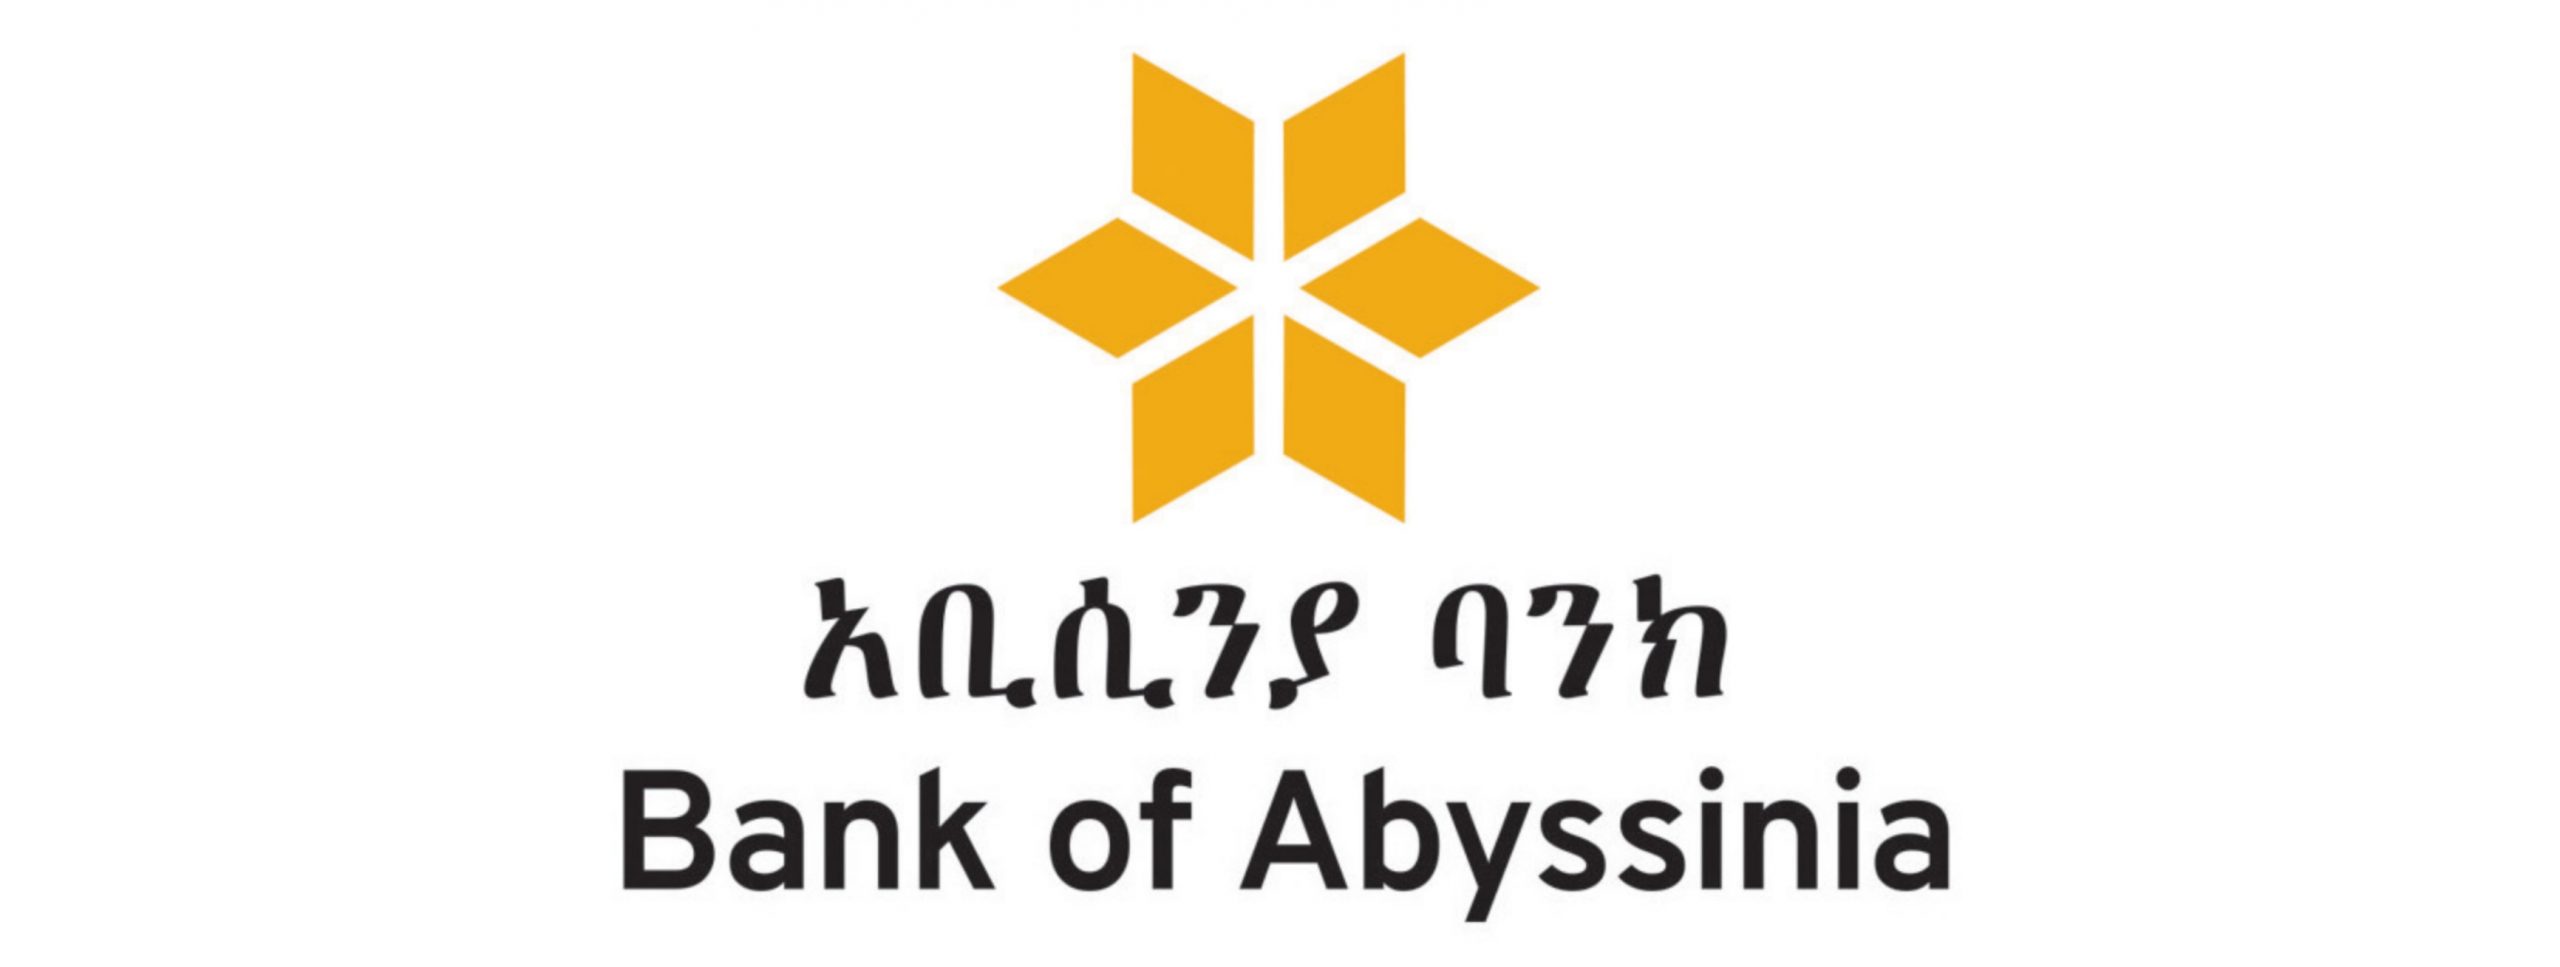 Bank of Abyssinia (BOA) has Upgraded its Core Banking System